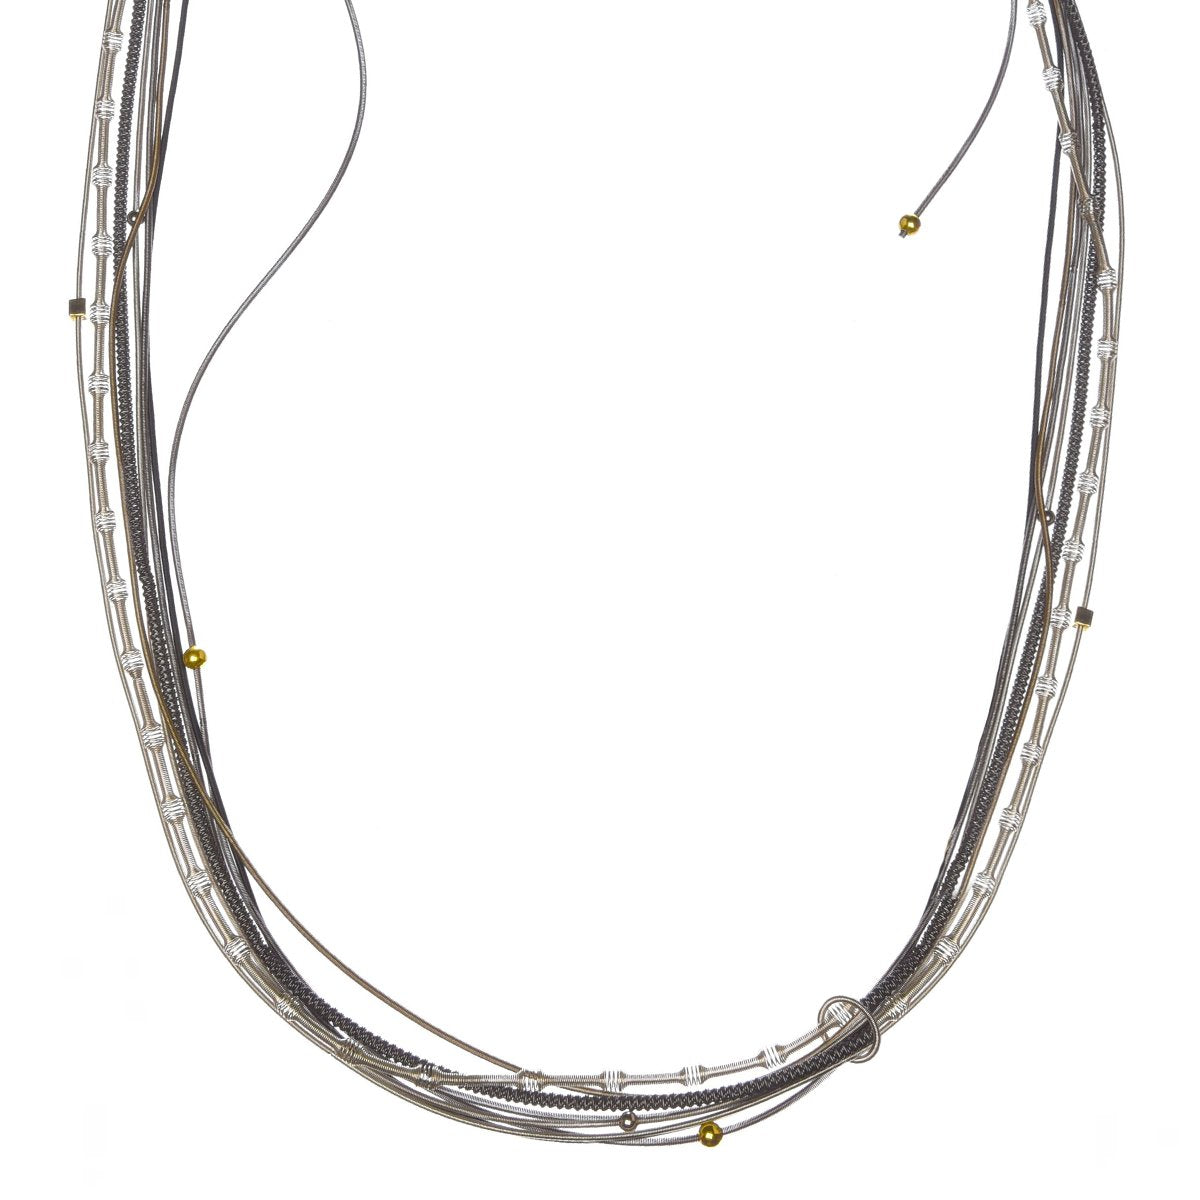 Golden Piano Wire Necklace with Black Beads – Ravinia Festival Shop